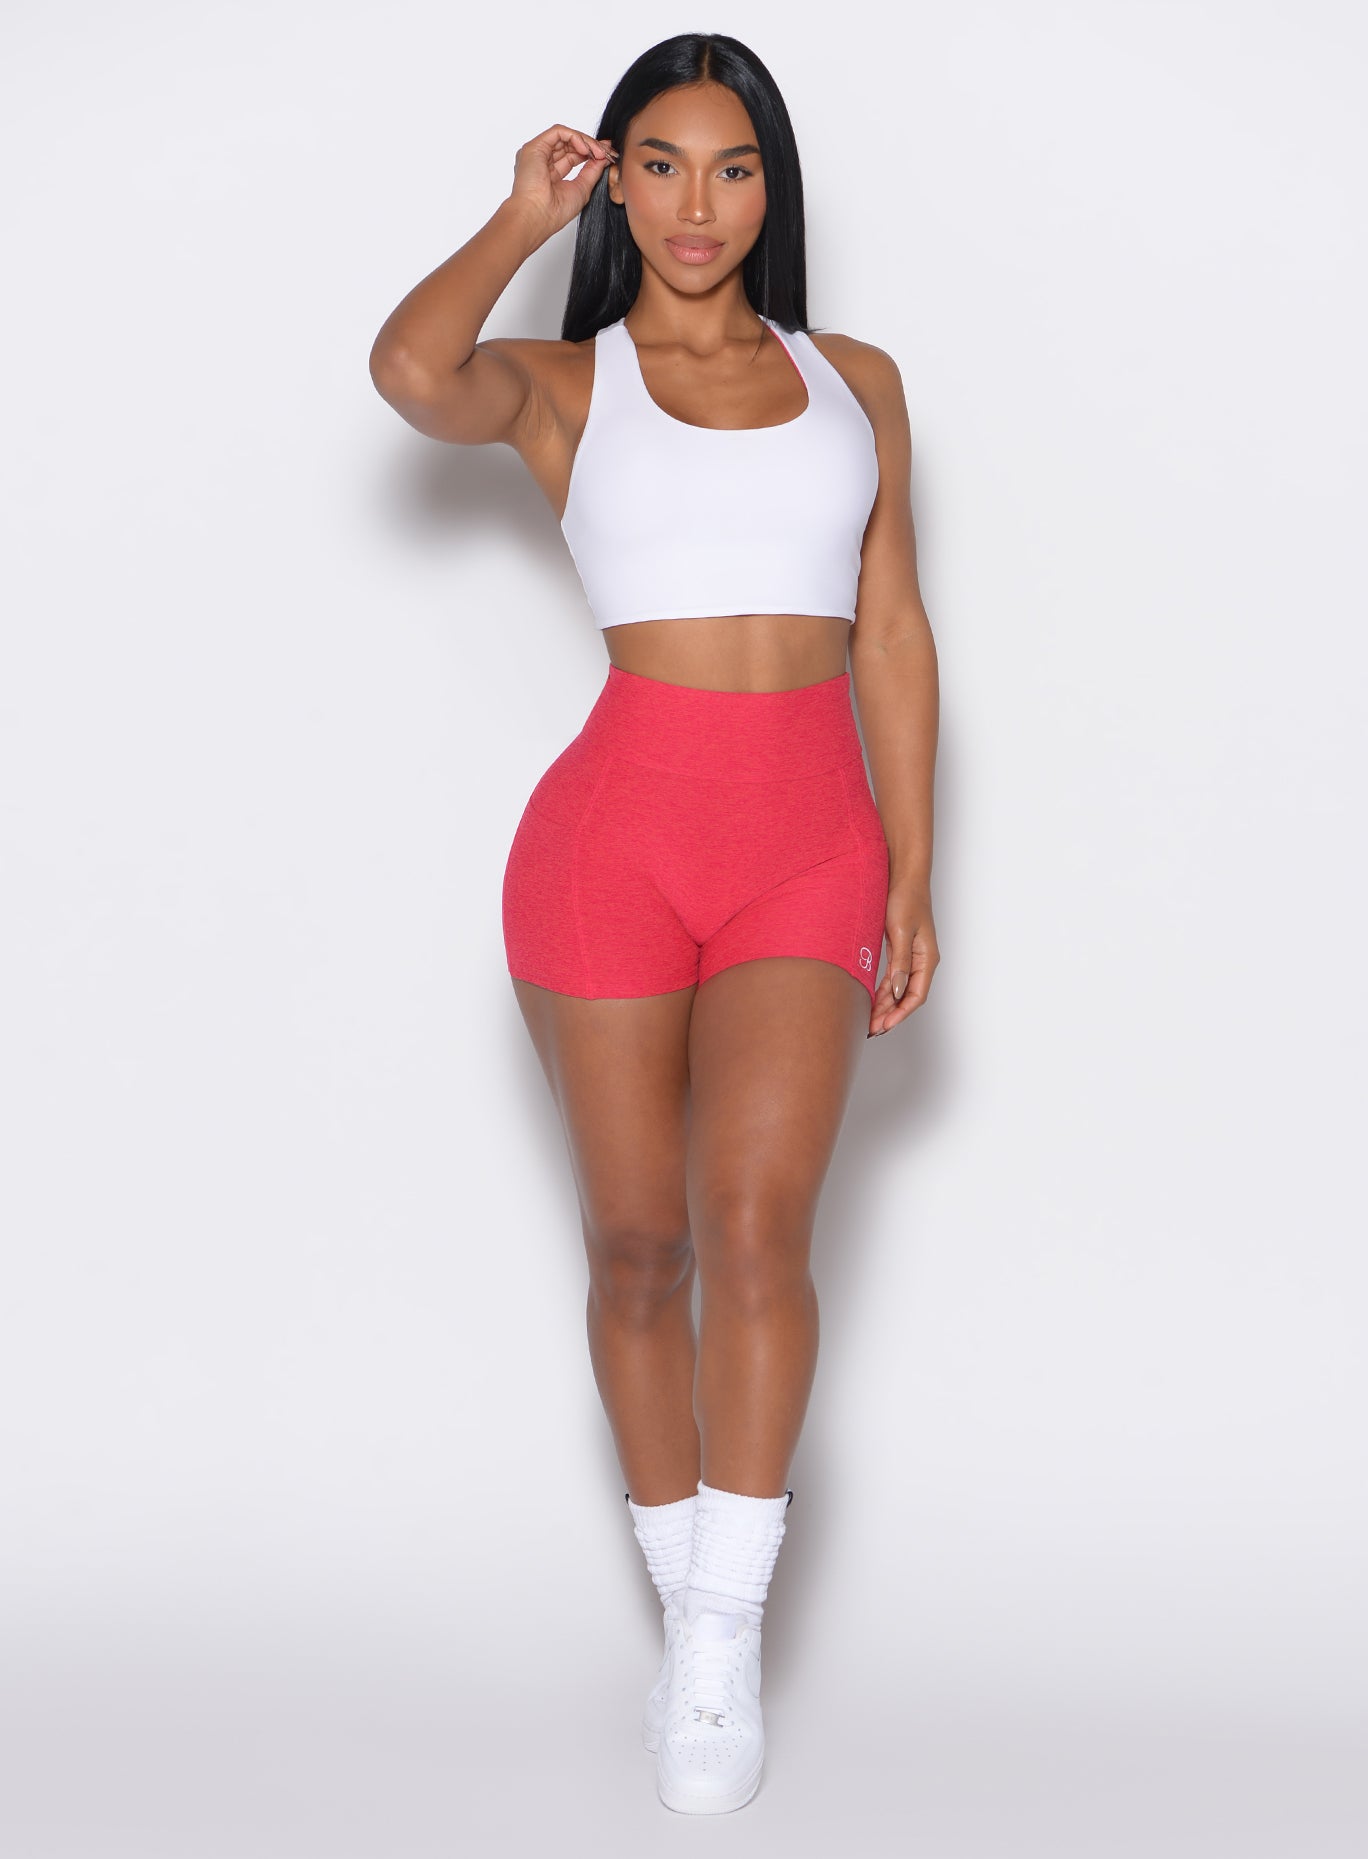 front  profile view of a model wearing our scrunch shorts in Raspberry Punch color along with a white reversible bra